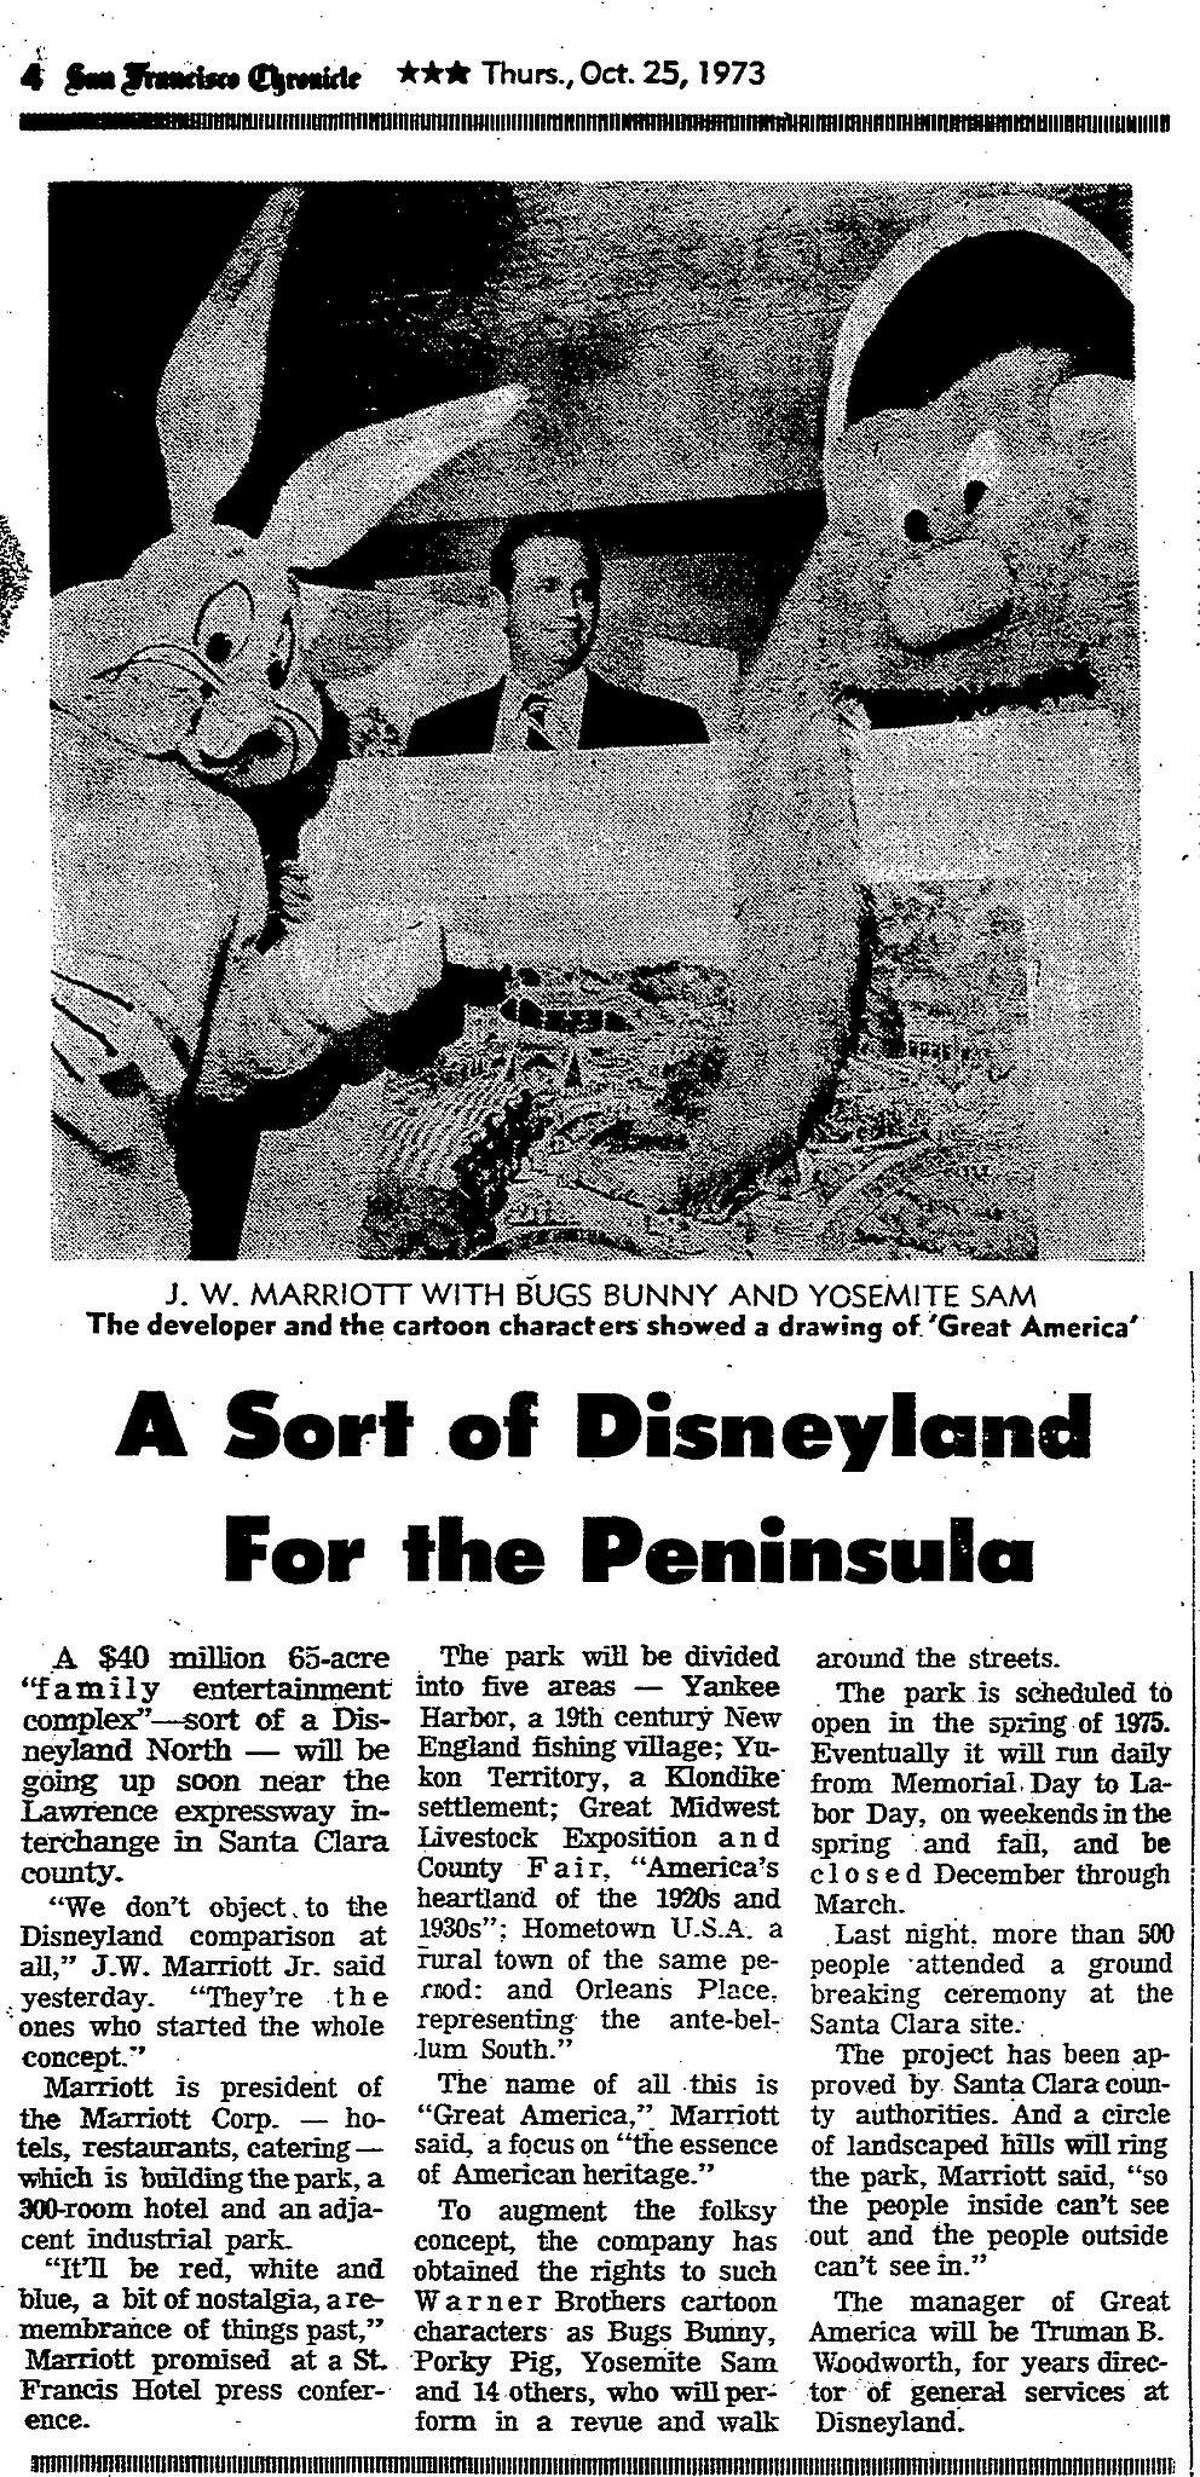 October 25, 1973 Chronicle coverage of the announcement of a new amusement park, Marriott's Great America.